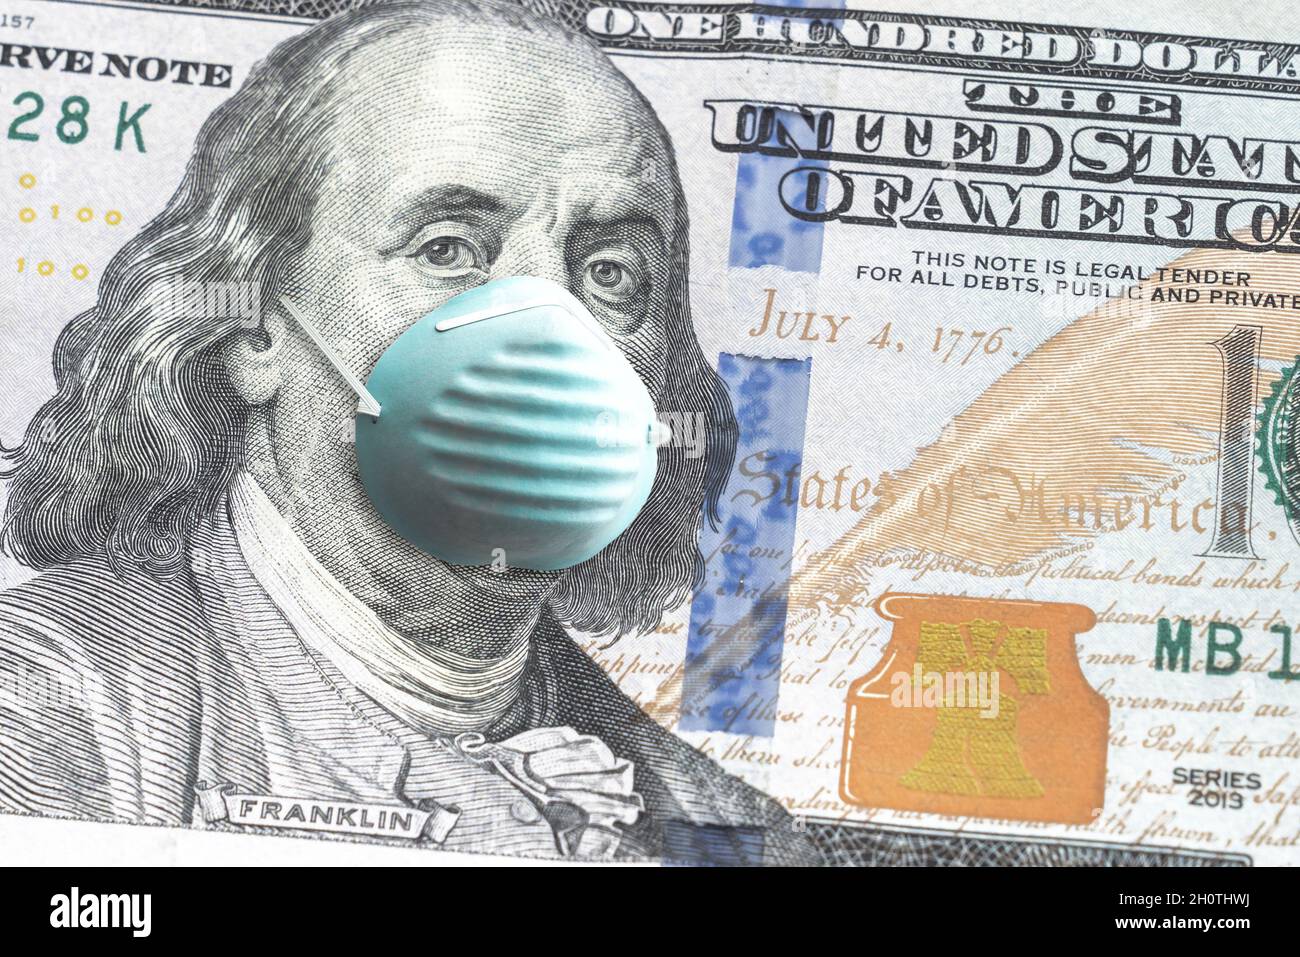 Close up of United States paper currency one hundred dollar bill with Benjamin Franklin wearing blue face mask due to COVID-19 pandemic making a great Stock Photo